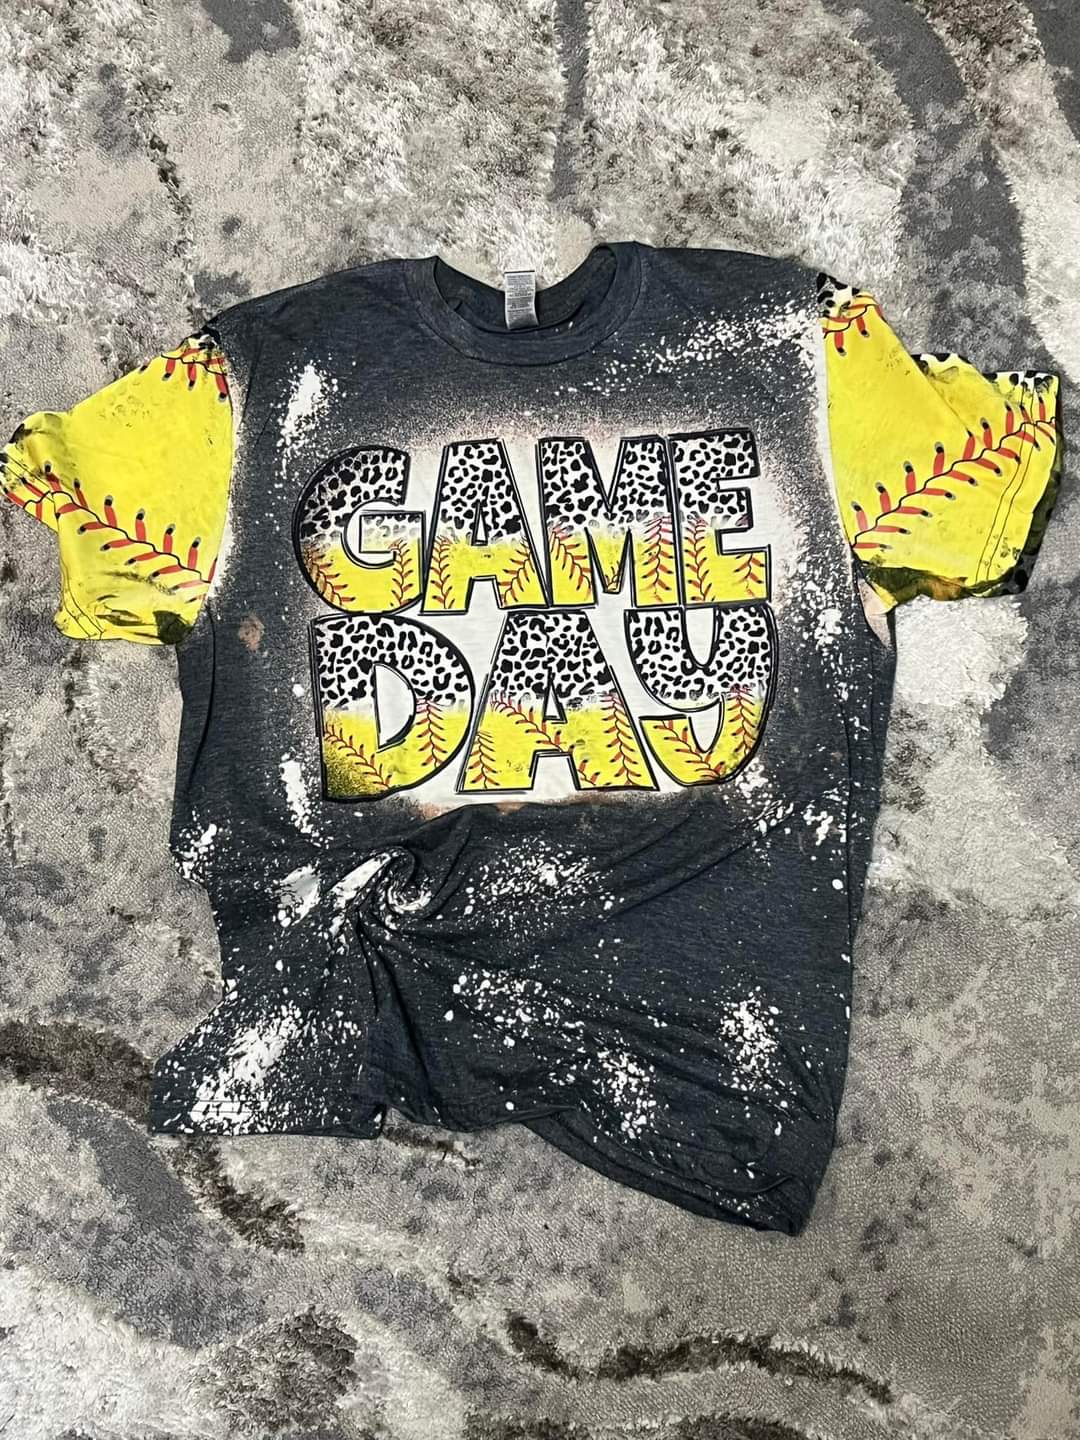 Game day sports